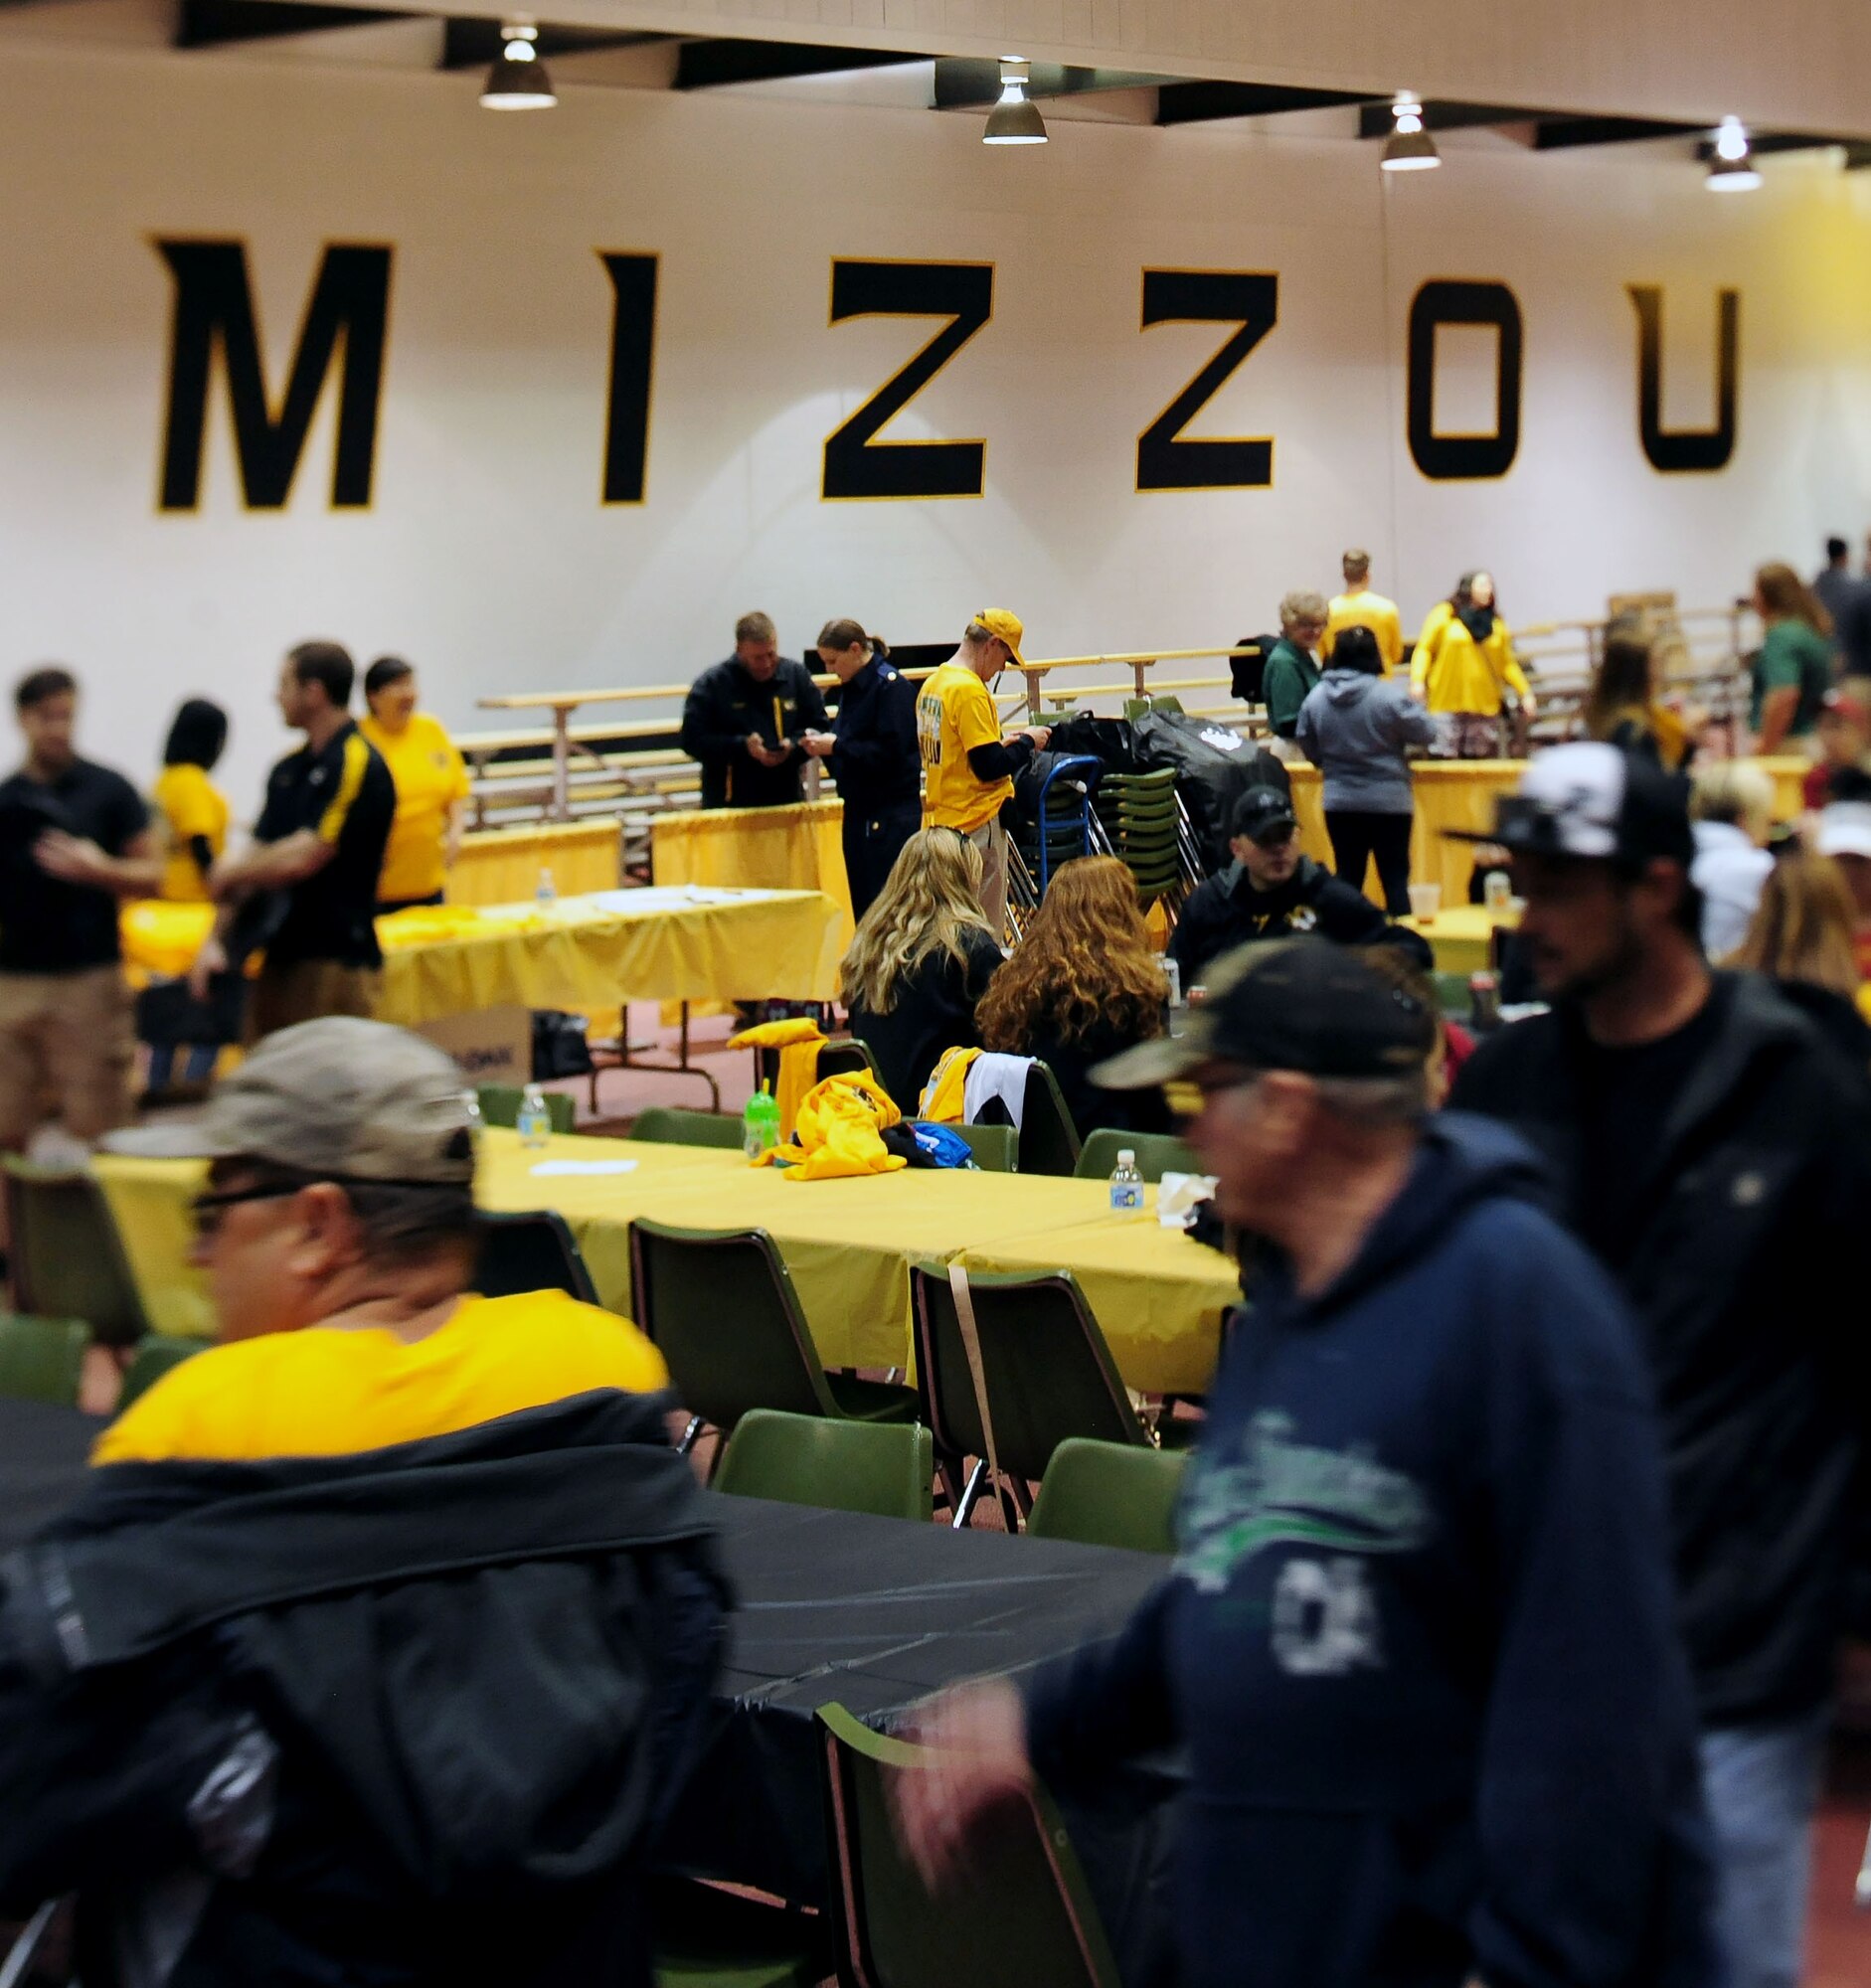 Members from Team Whiteman attend a free “tailgate” event at the Hearnes Fieldhouse Oct. 3, 2015, in Columbia, Mo. The tailgate event at the University of Missouri offered food, drinks and commemorative military appreciation day shirts for service members and their families. Entertainment was provided by the MU cheerleaders, golden girls and the Marching Mizzou band. (U.S. Air Force photo by Airman 1st Class Jazmin Smith/Released)